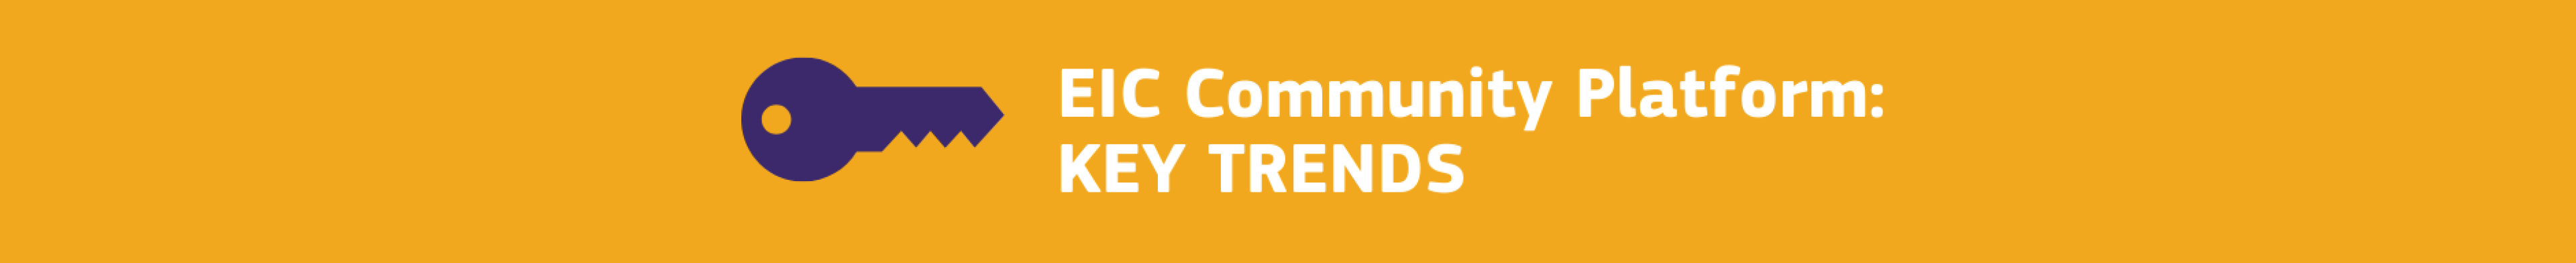 banner-community_trends.png